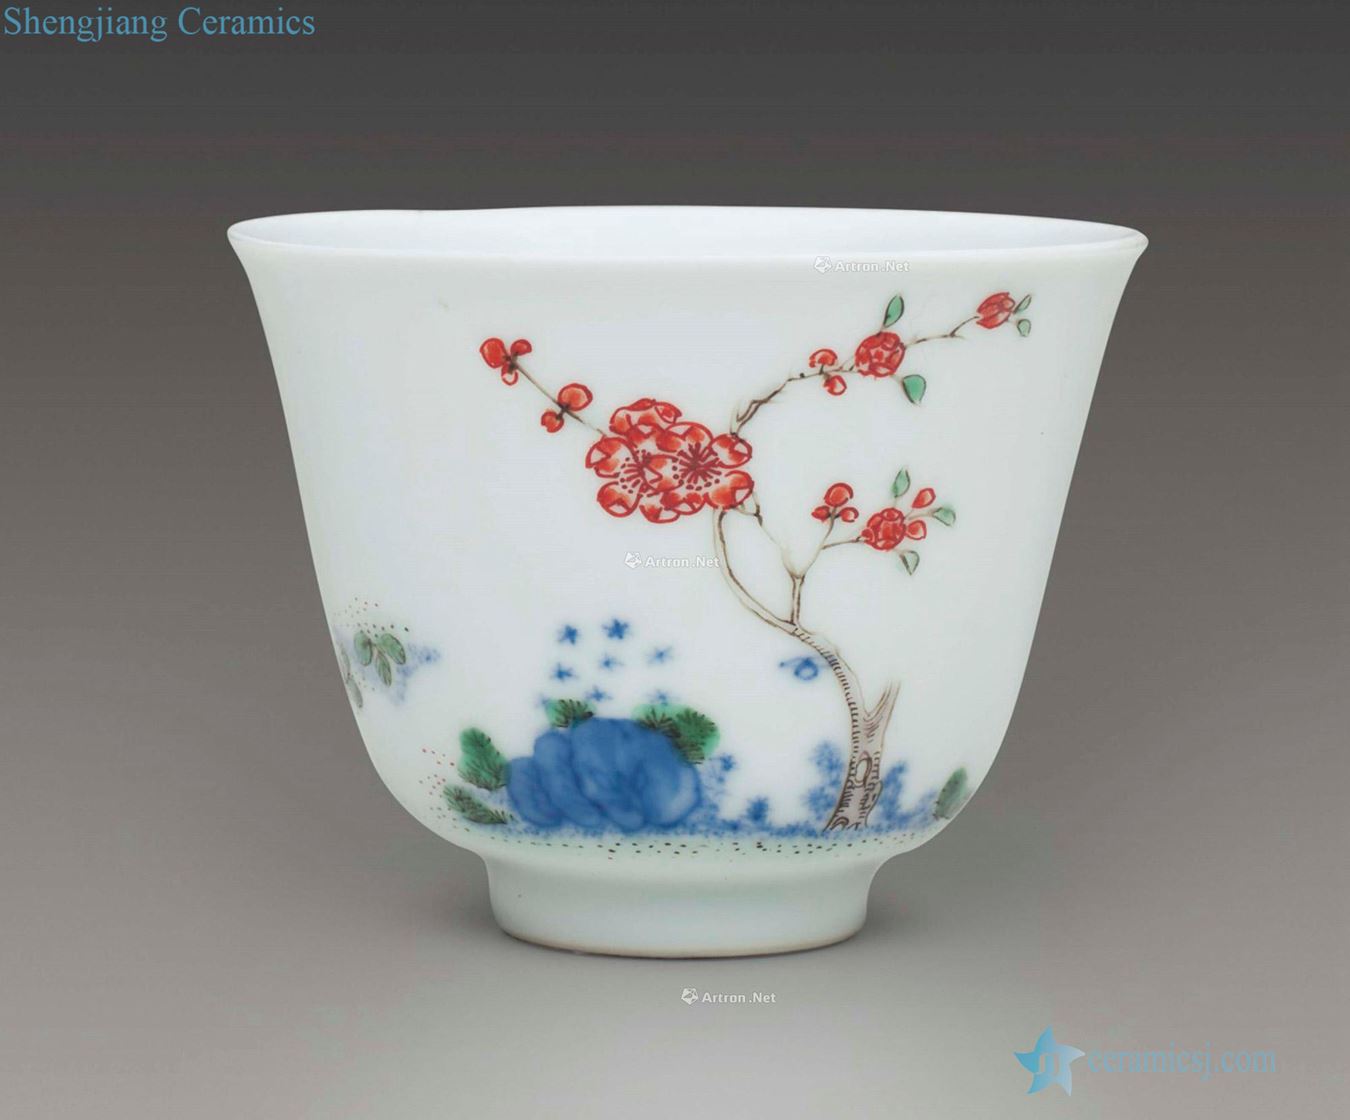 KANGXI SIX ~ CHARACTER MARK IN UNDERGLAZE BLUE WITHIN A DOUBLE CIRCLE THE AND OF THE PERIOD (1662 ~ 1722) A FAMILLE VERTE 'APRICOT BLOSSOM put' 'MONTH' CUP